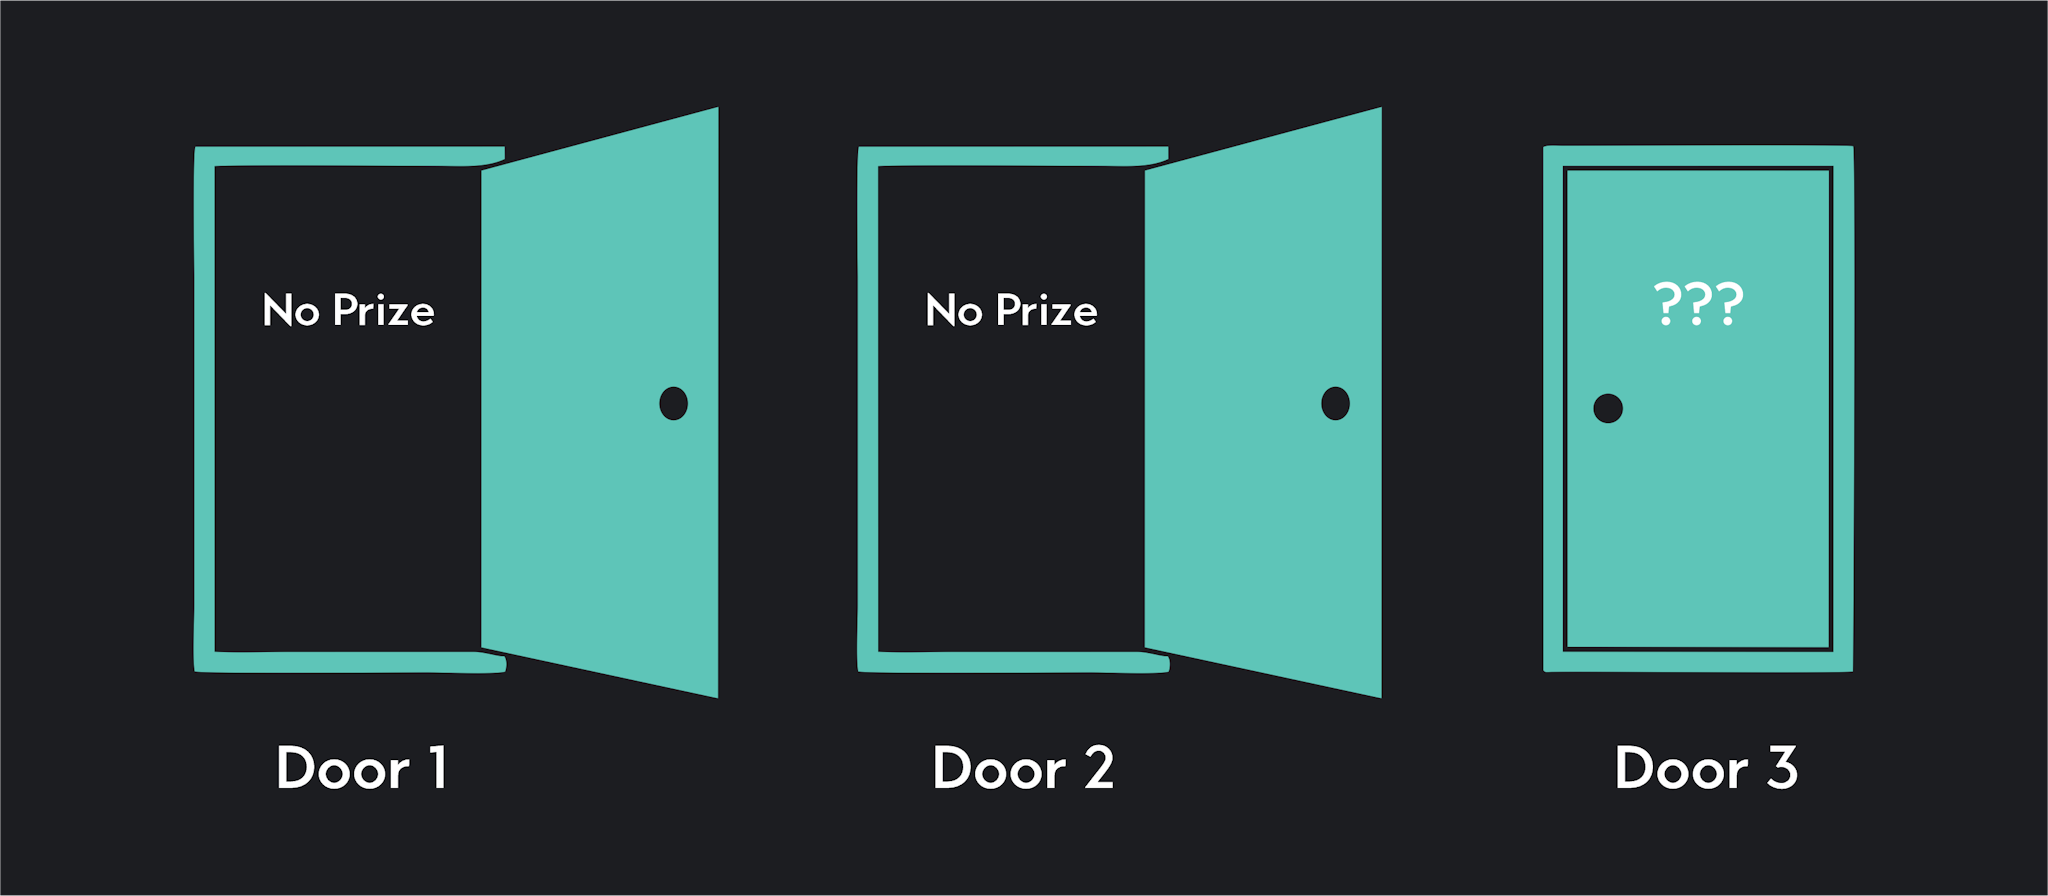 Graphic of doors to a game show to show the intuition behind degrees of freedom